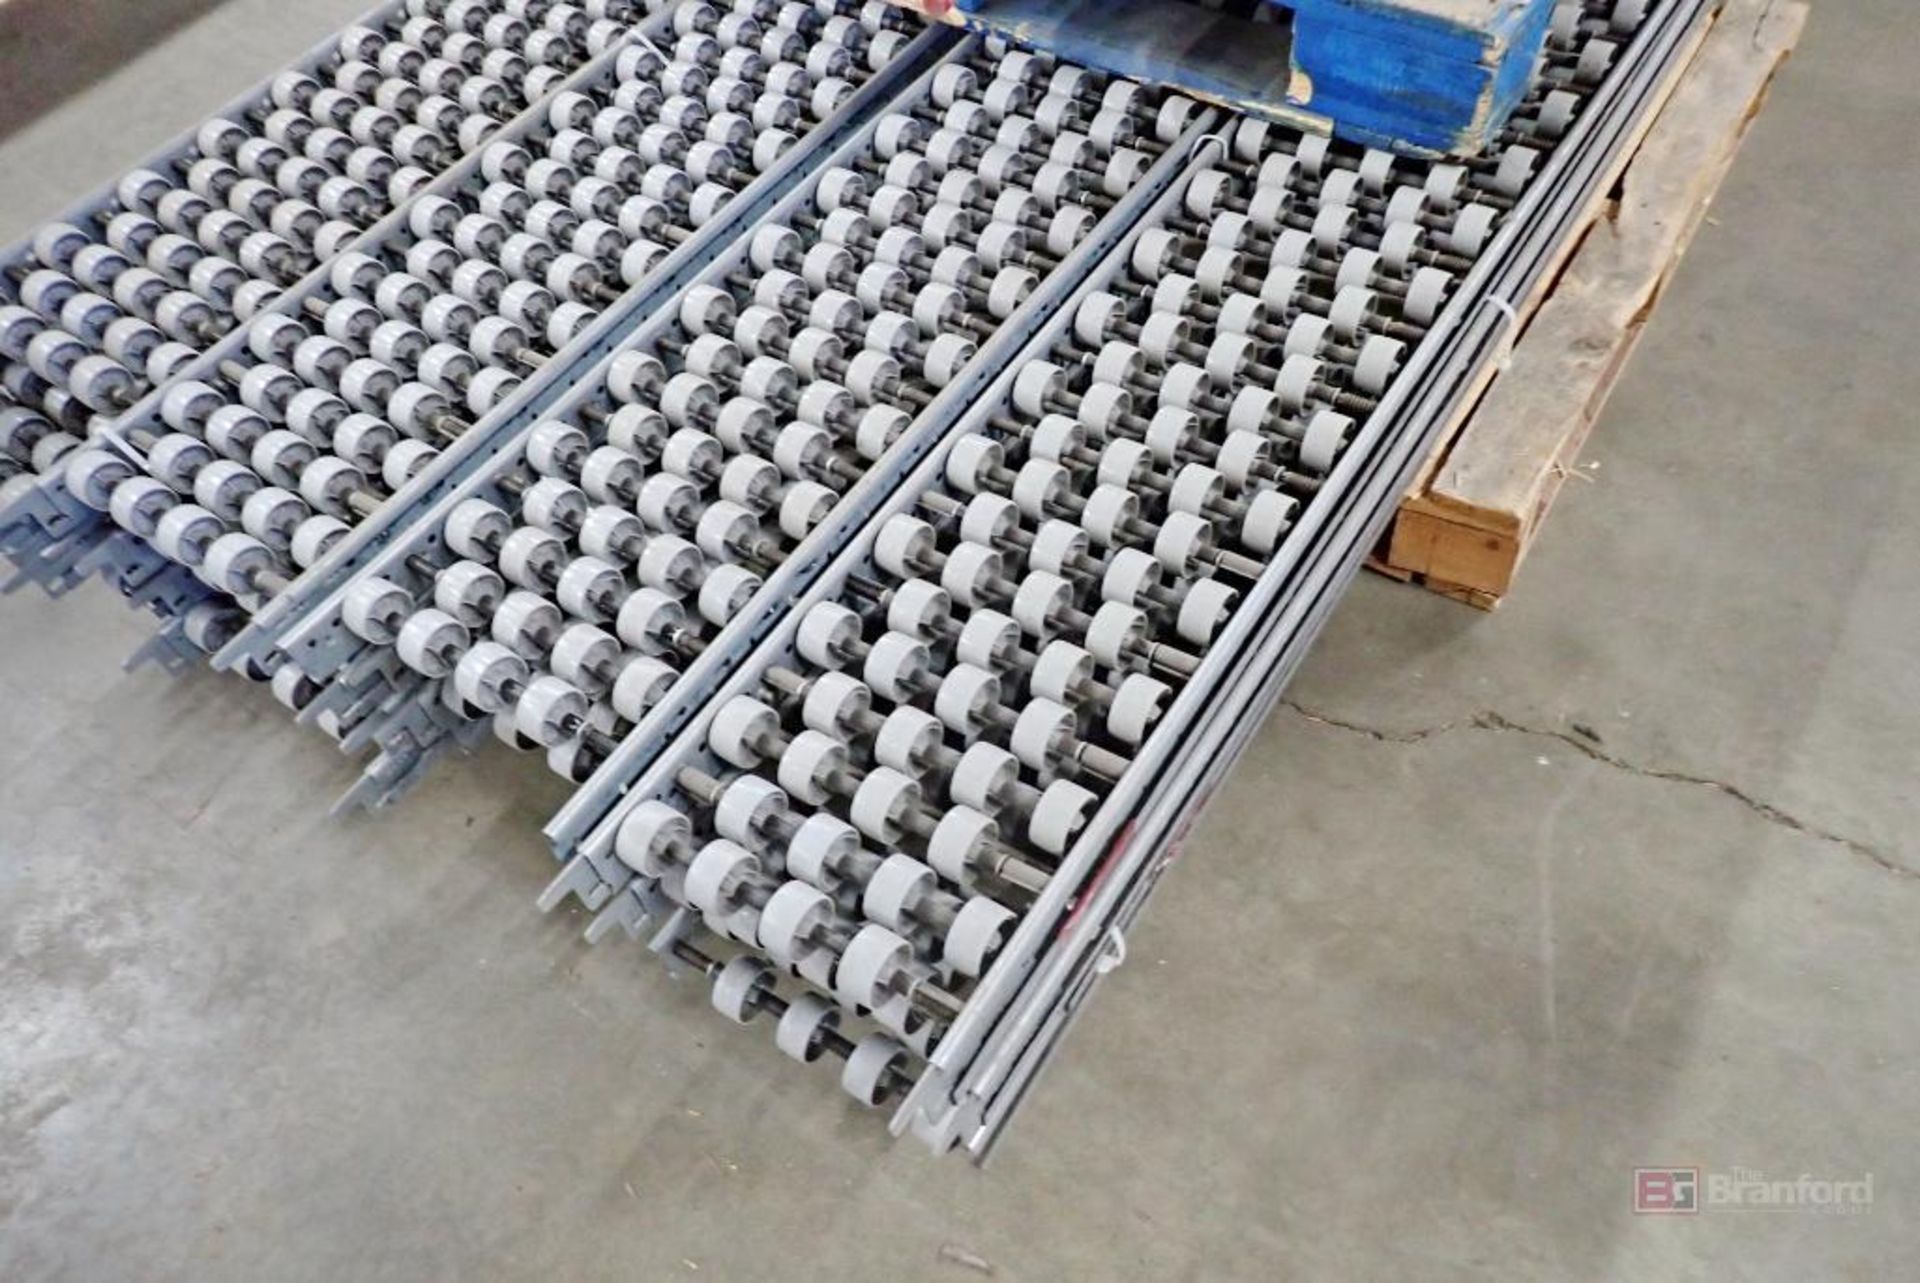 Large Lot of Flow Racking Inserts and Rollers (12 Pallets) - Image 8 of 11